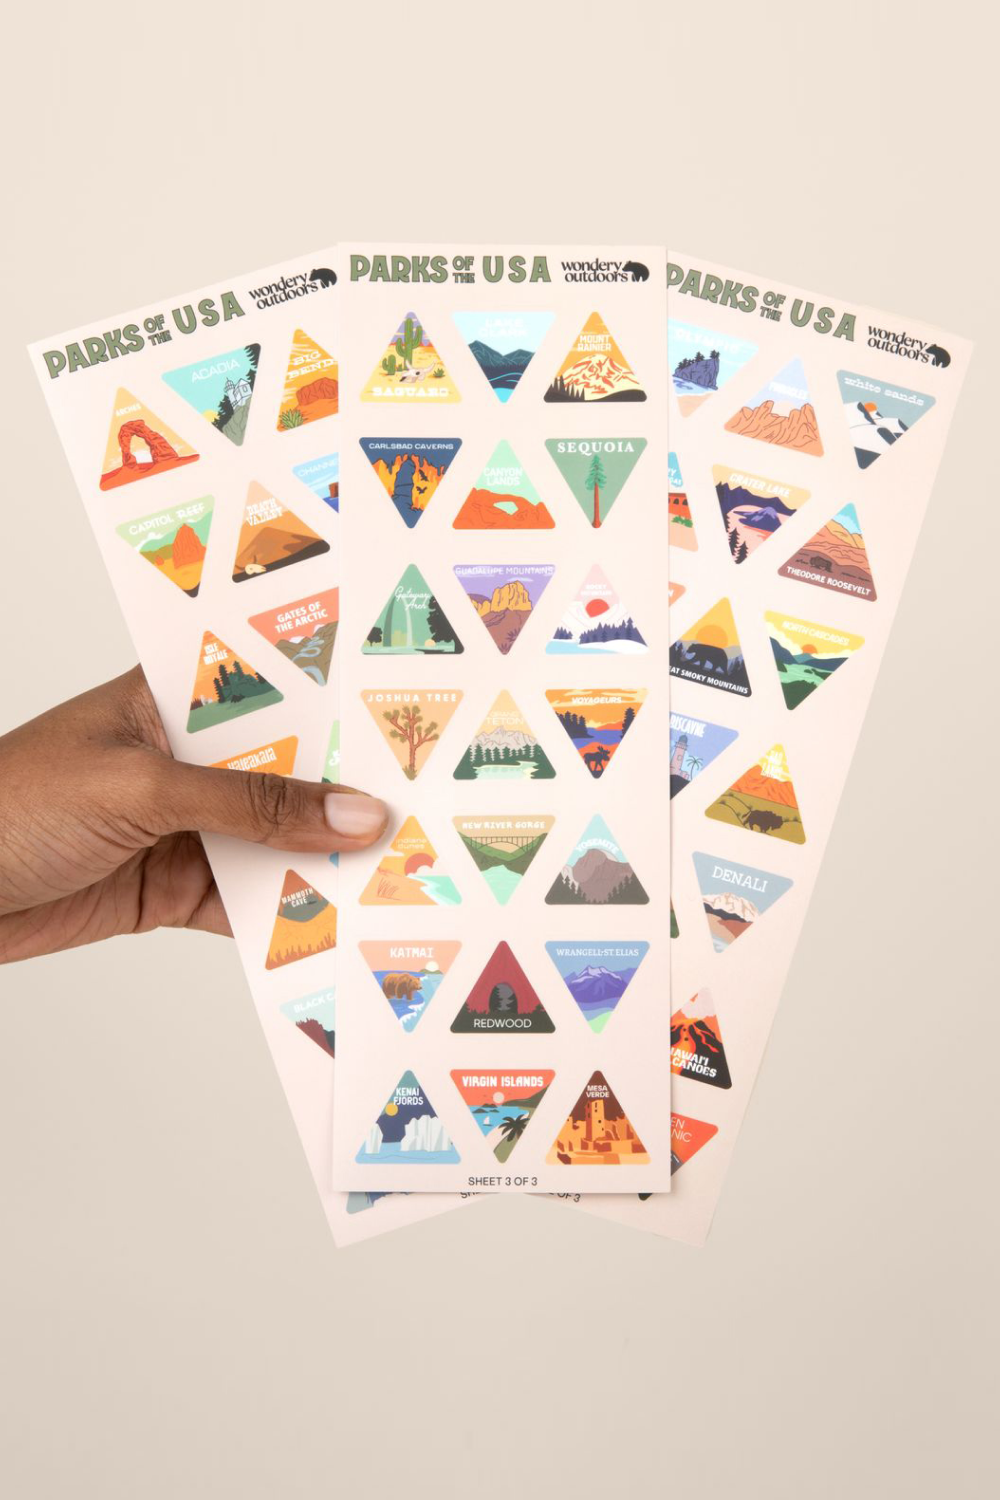 Parks of the USA Sticker Sheets